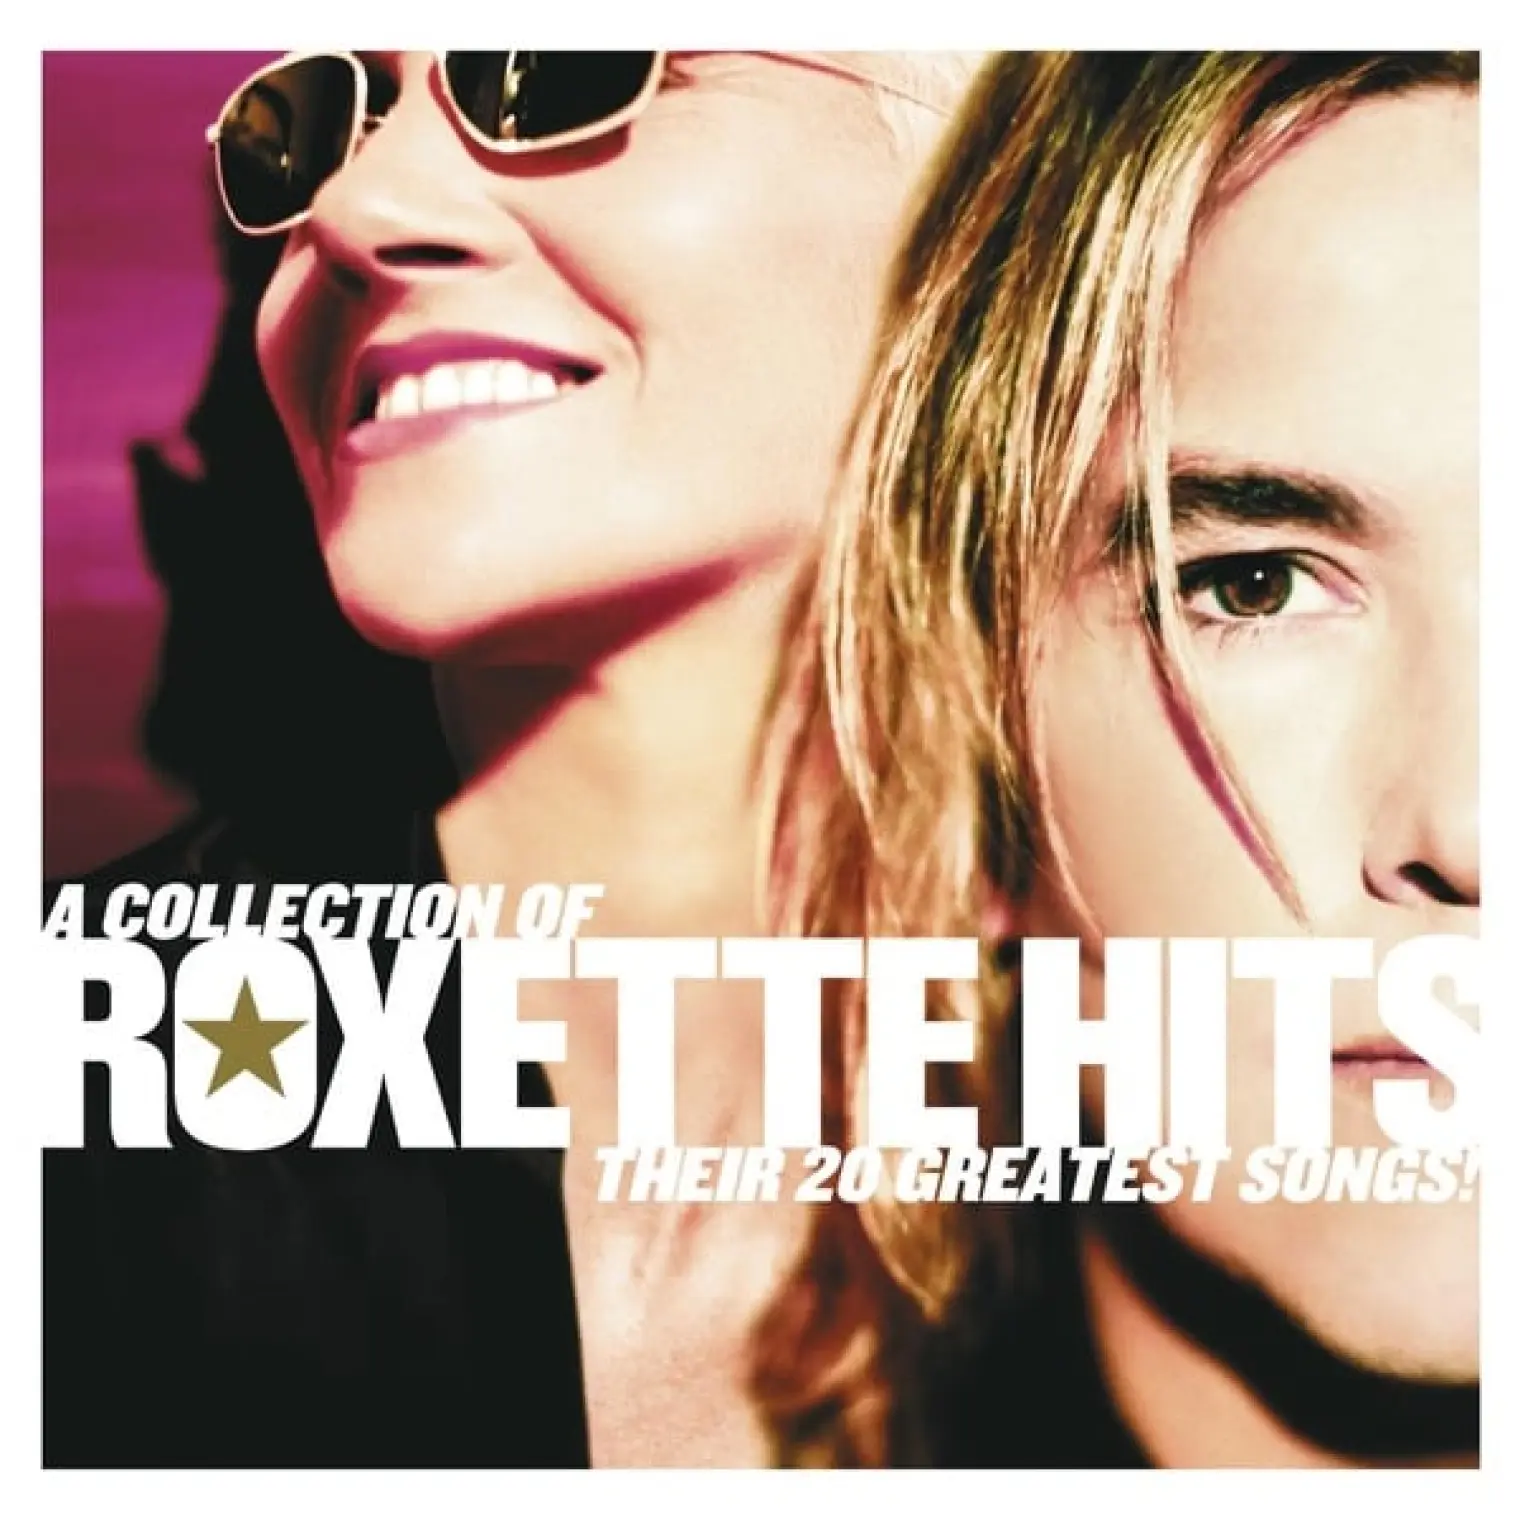 A Collection of Roxette Hits! Their 20 Greatest Songs! -  Roxette 